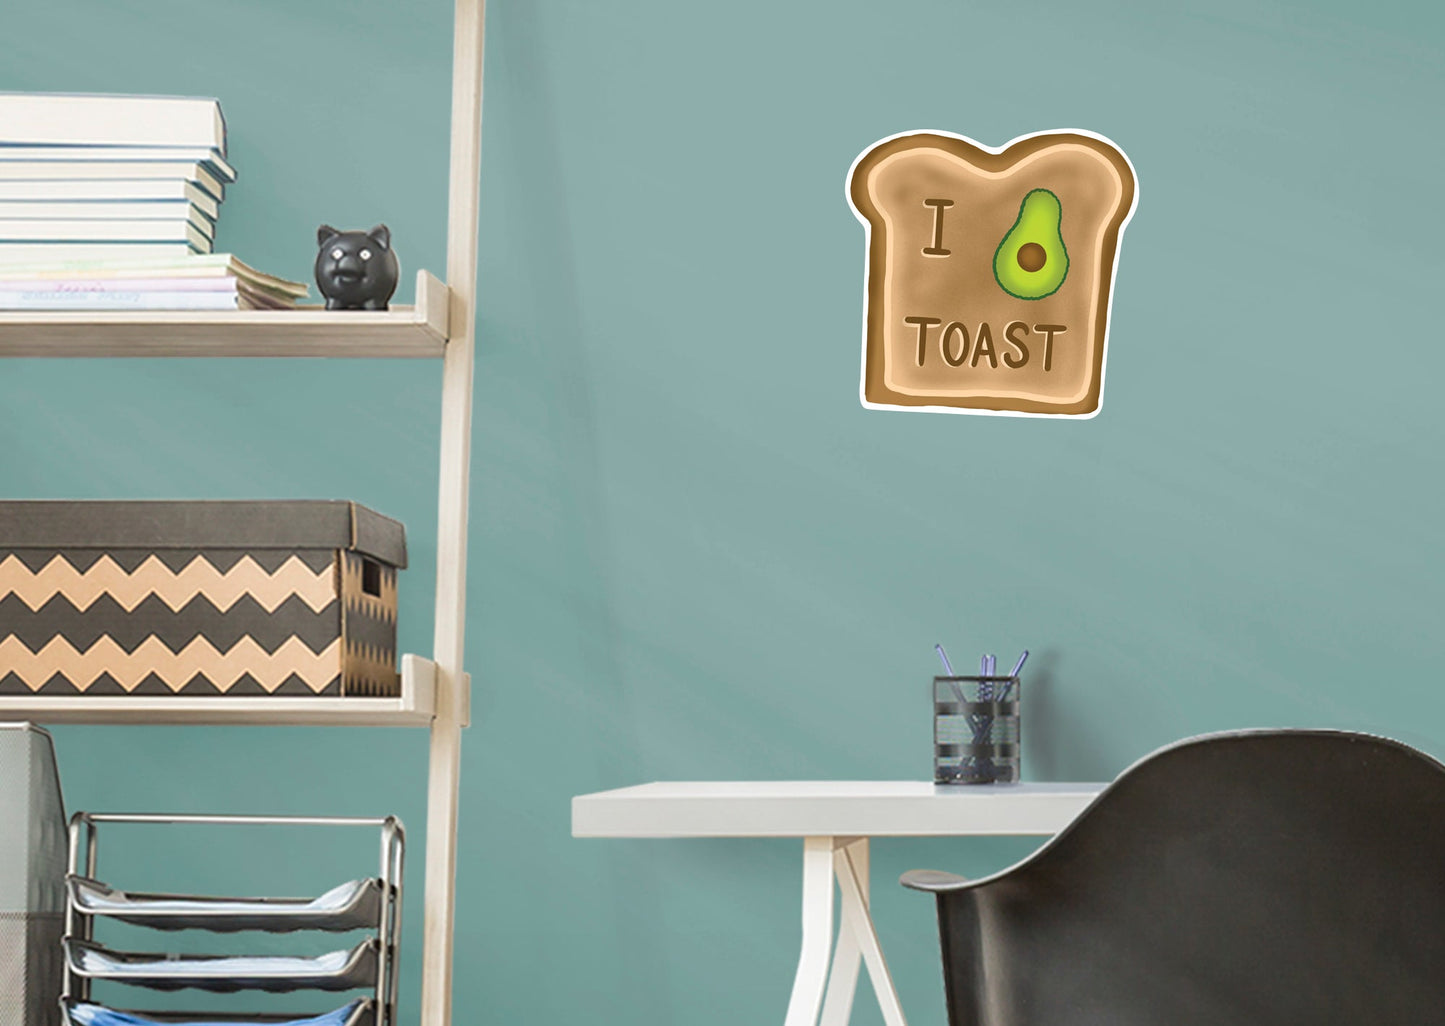 I Love Avocado Toast        - Officially Licensed Big Moods Removable     Adhesive Decal